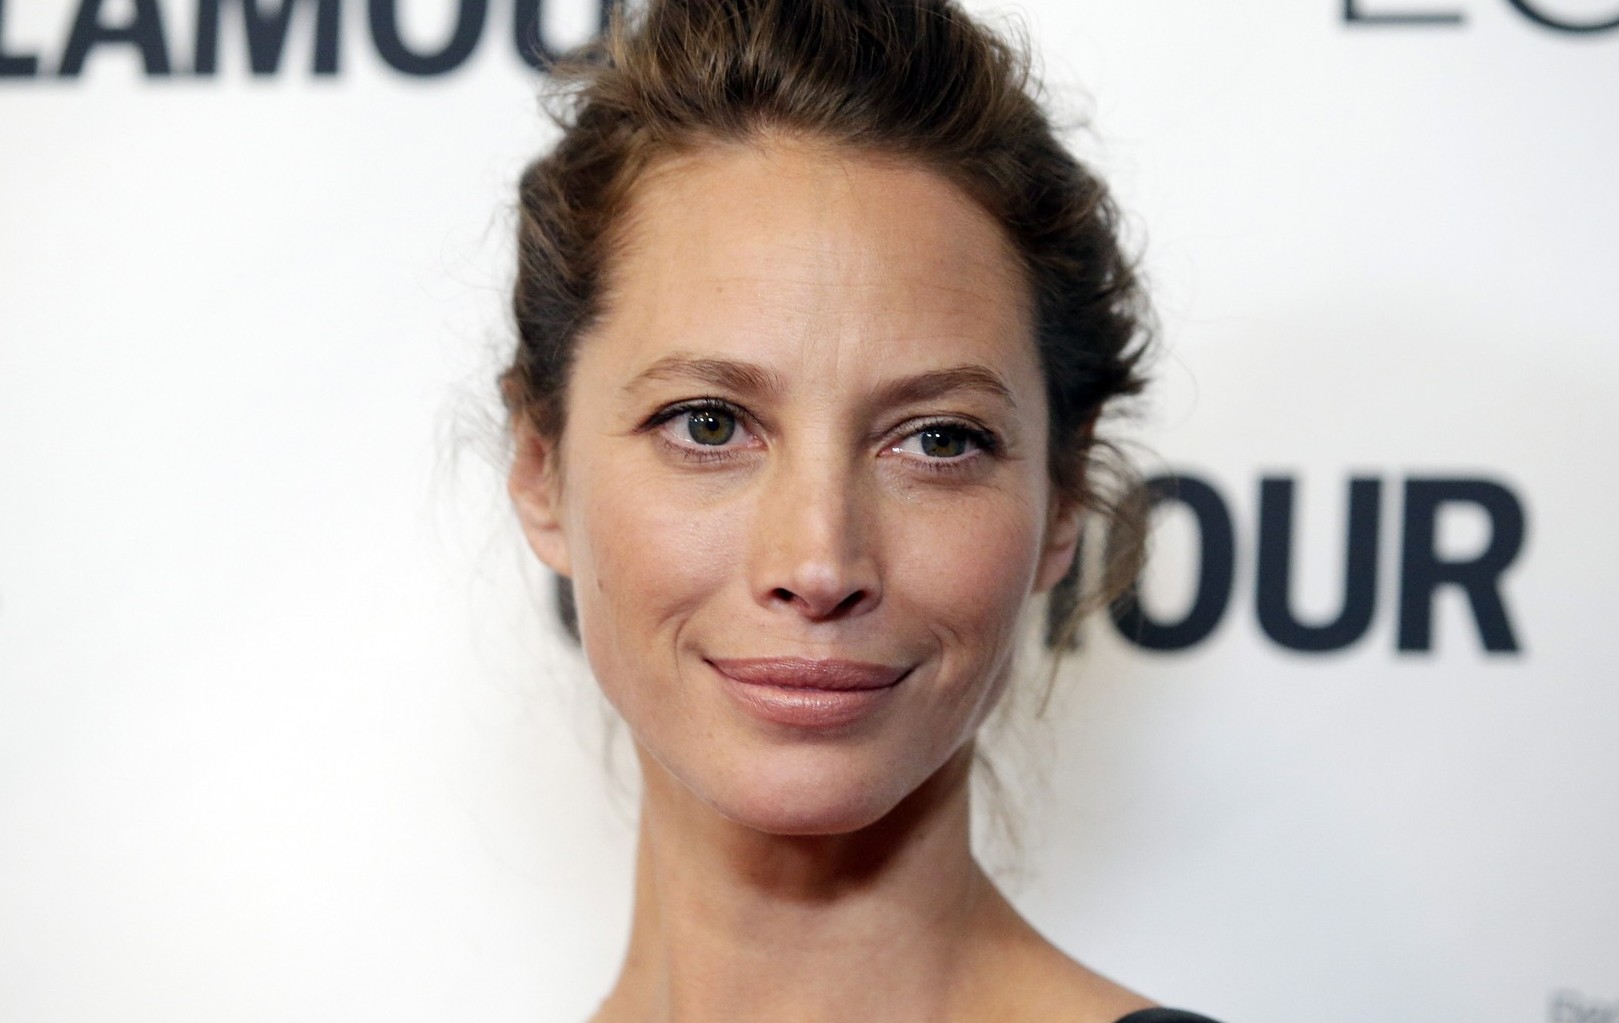 Christy Turlington Burns arrives on the red carpet at the 2013 Glamour Women of the Year Awards, sponsored by L'Oreal Paris, to honor courageous and inspiring women who are changing the world on November 11, 2013 in New York City., Image: 176486406, License: Rights-managed, Restrictions: , Model Release: no, Credit line: Profimedia, UPI